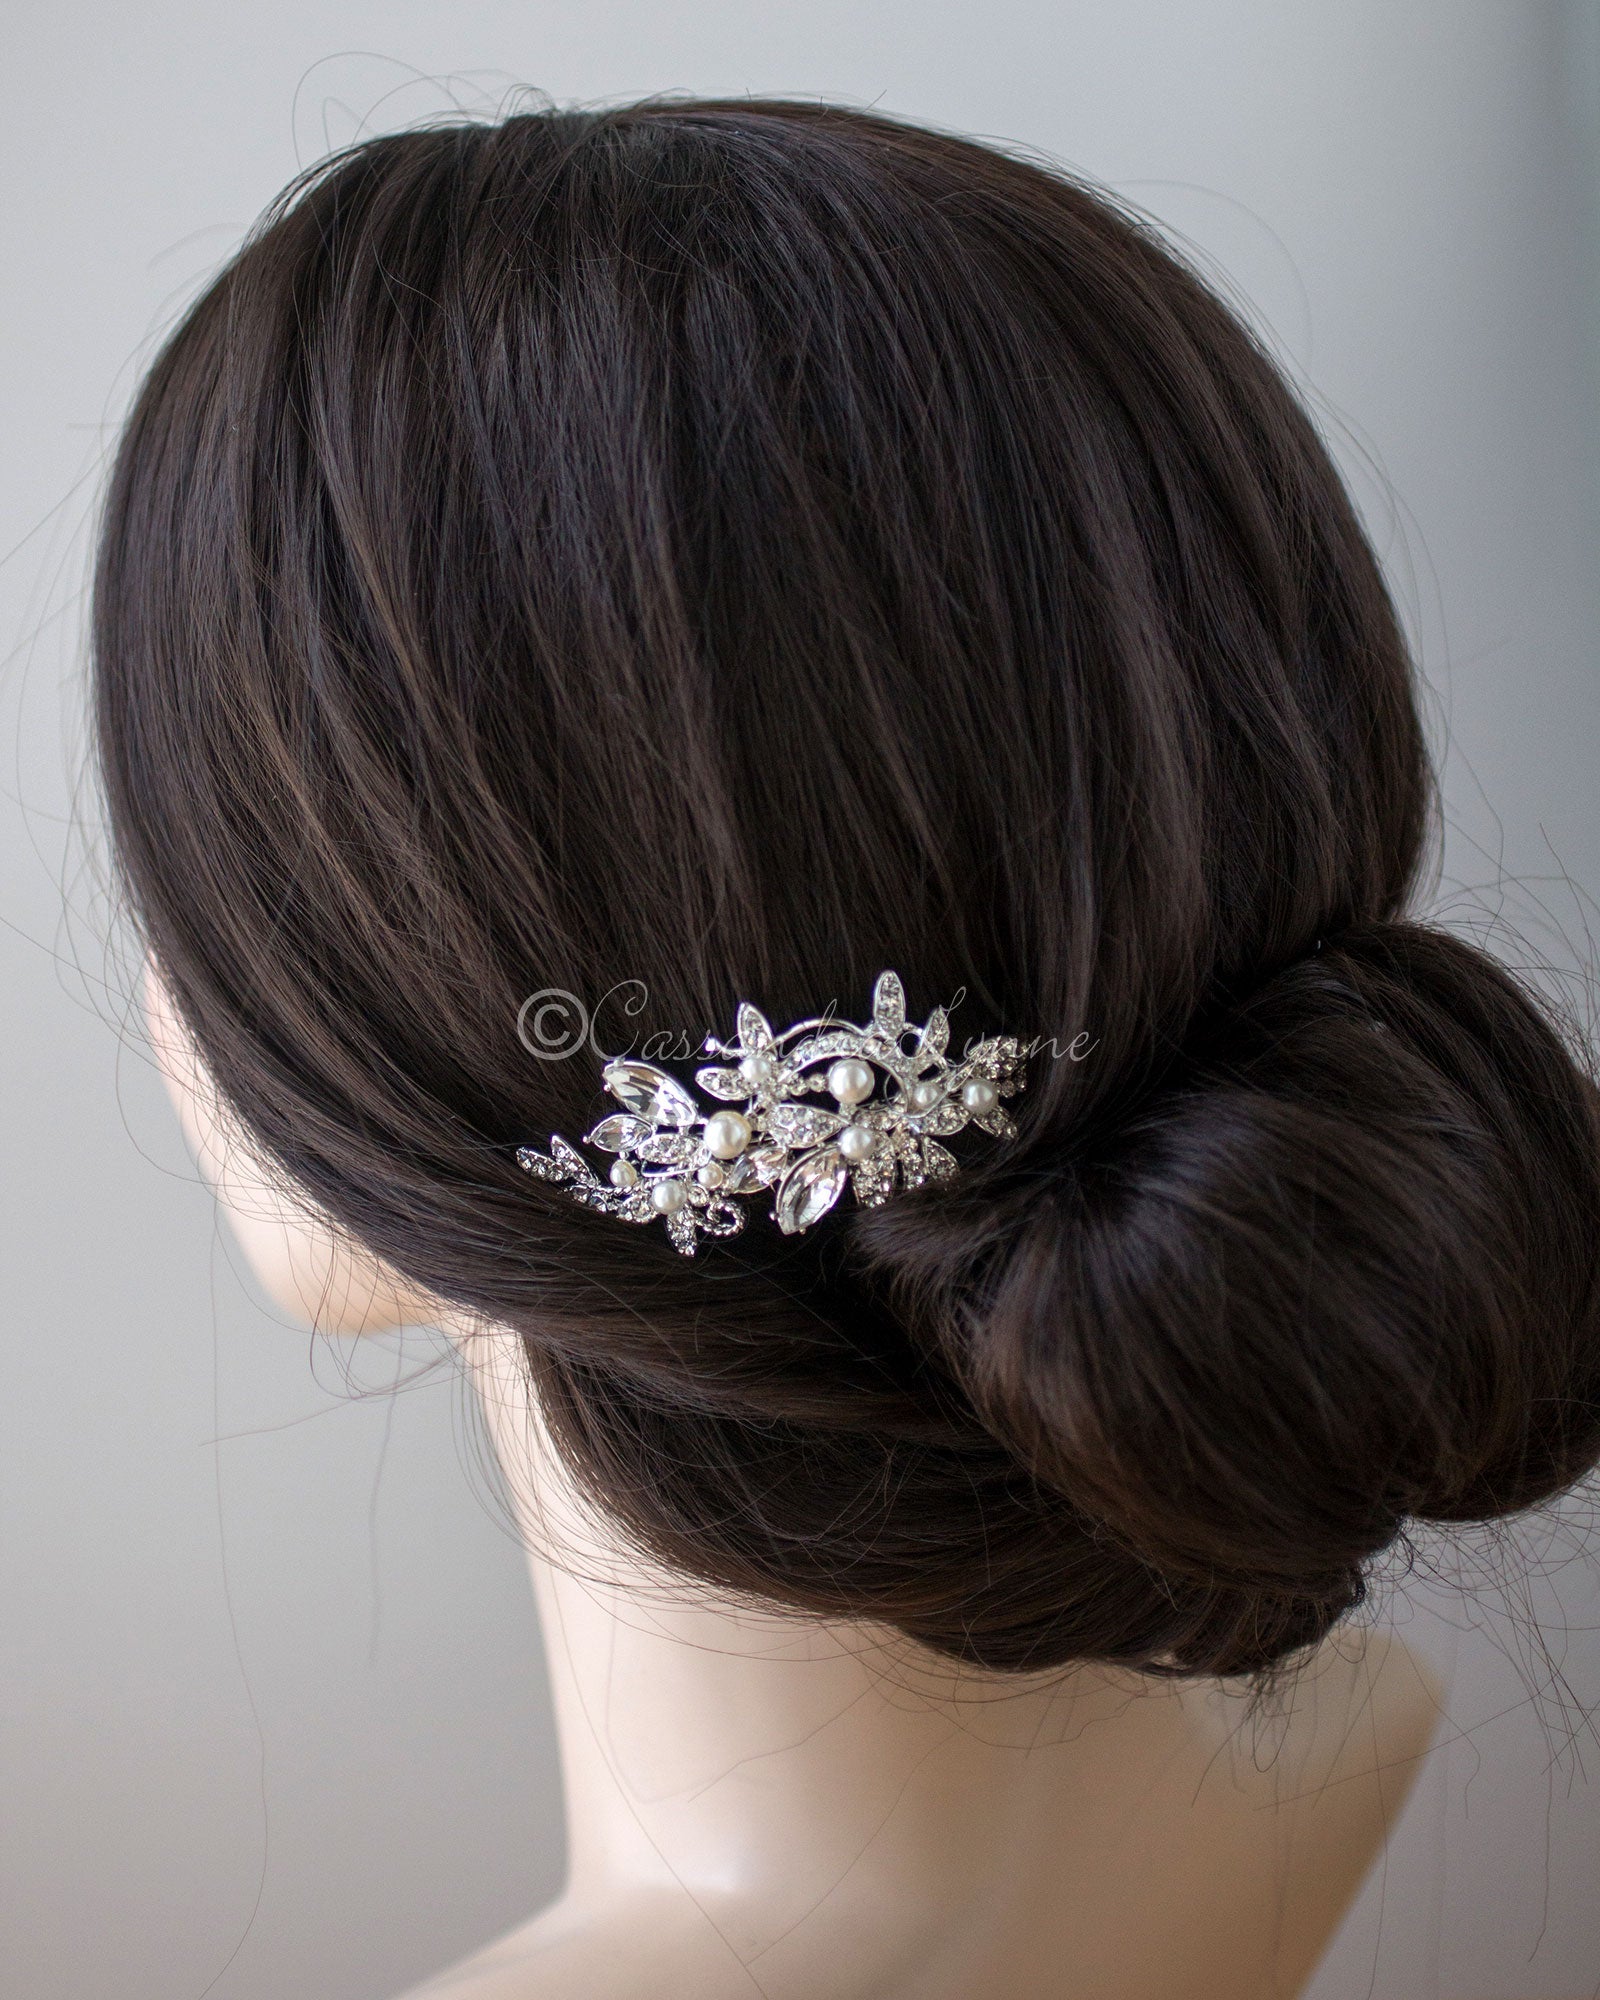 Small Wedding Comb with Pearls - Cassandra Lynne